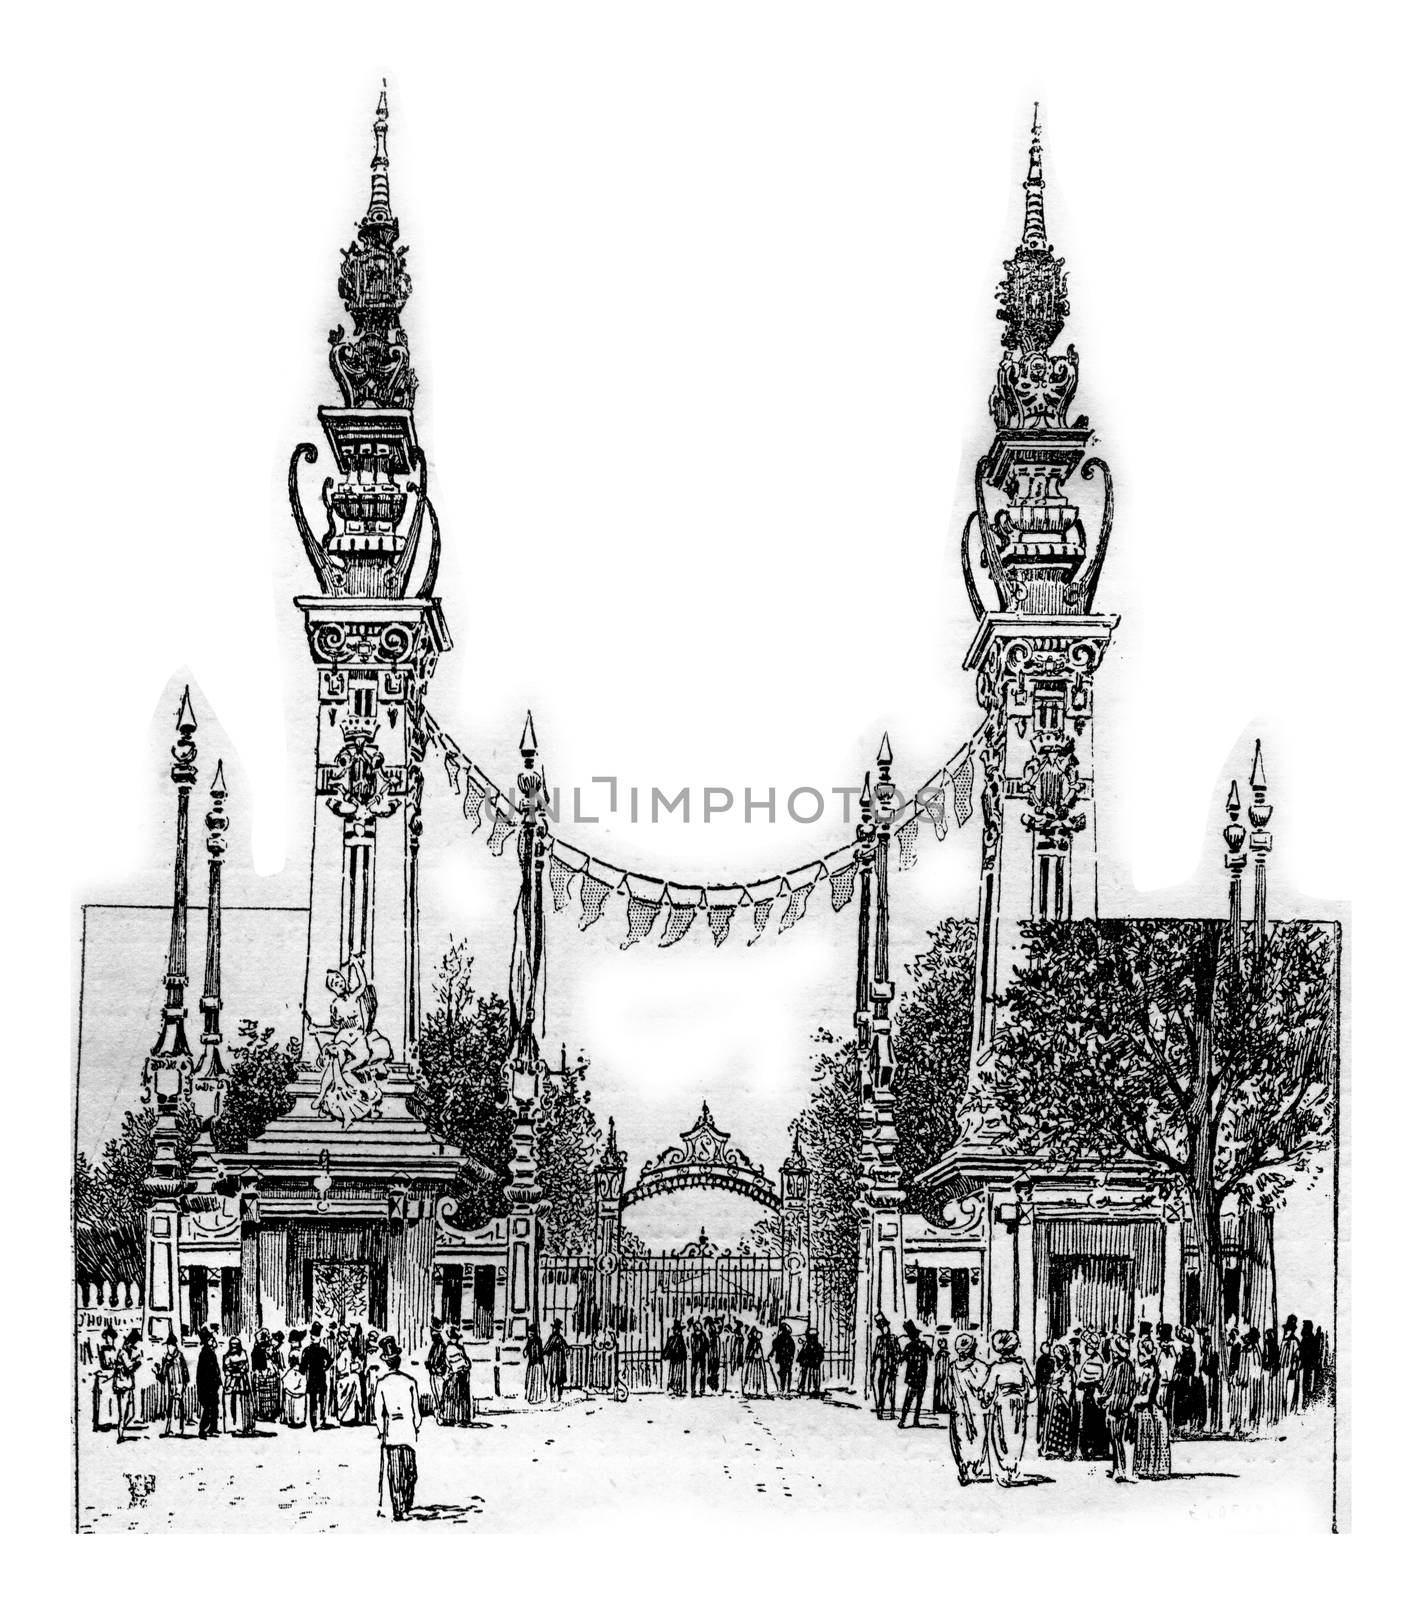 The entrance of the Quai d'Orsay in Paris, France. Vintage engraving.
